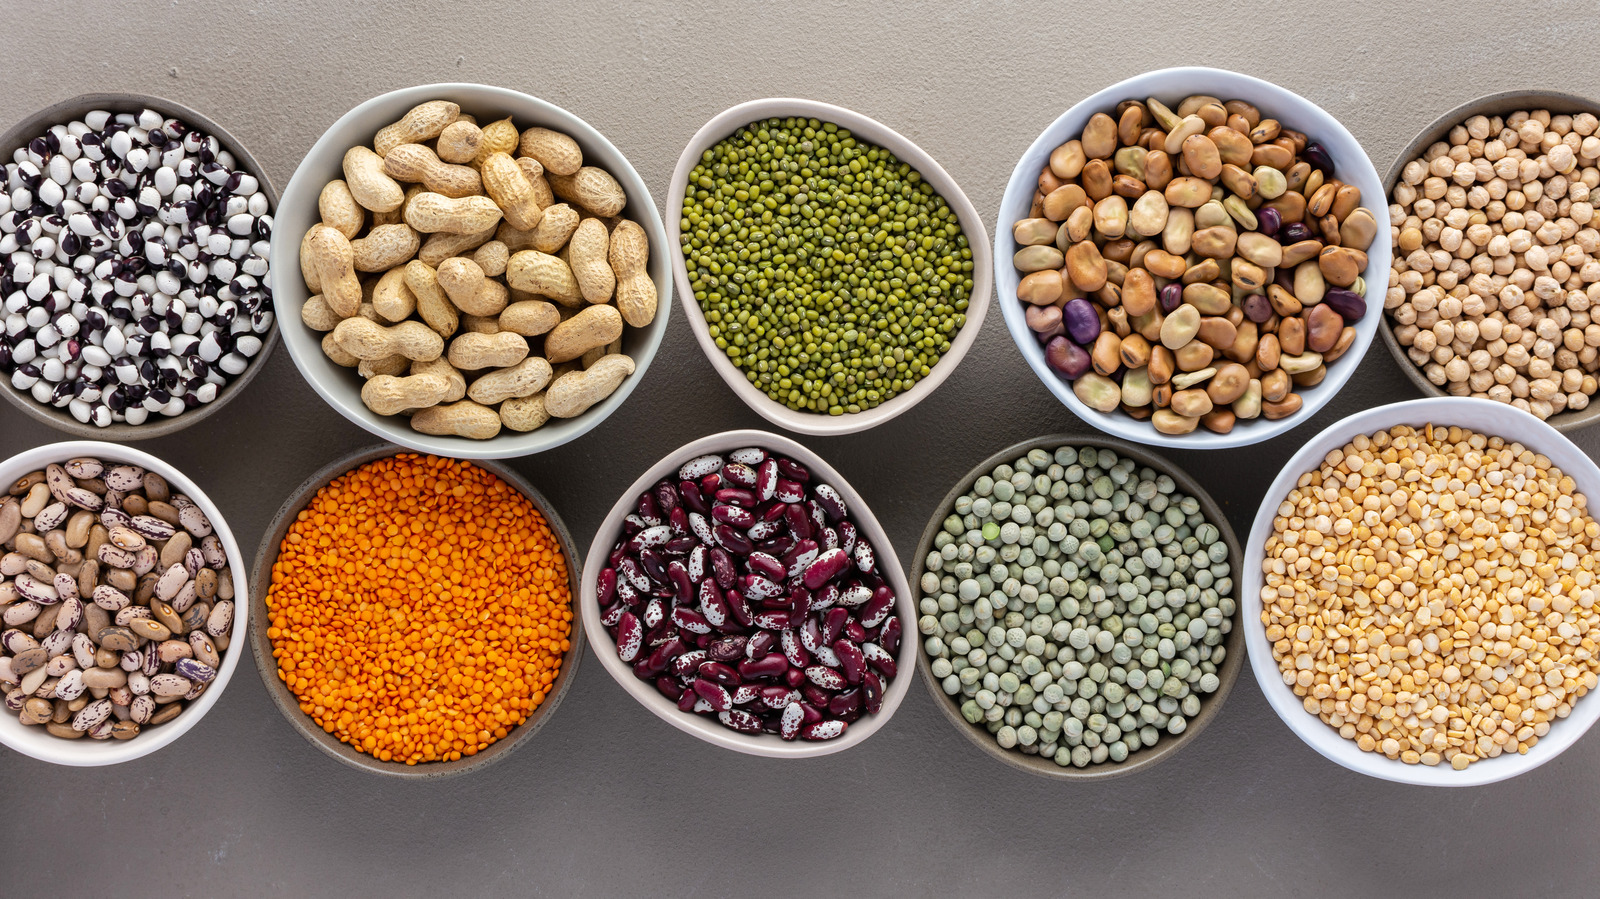 20 Most Popular Types Of Beans Explained